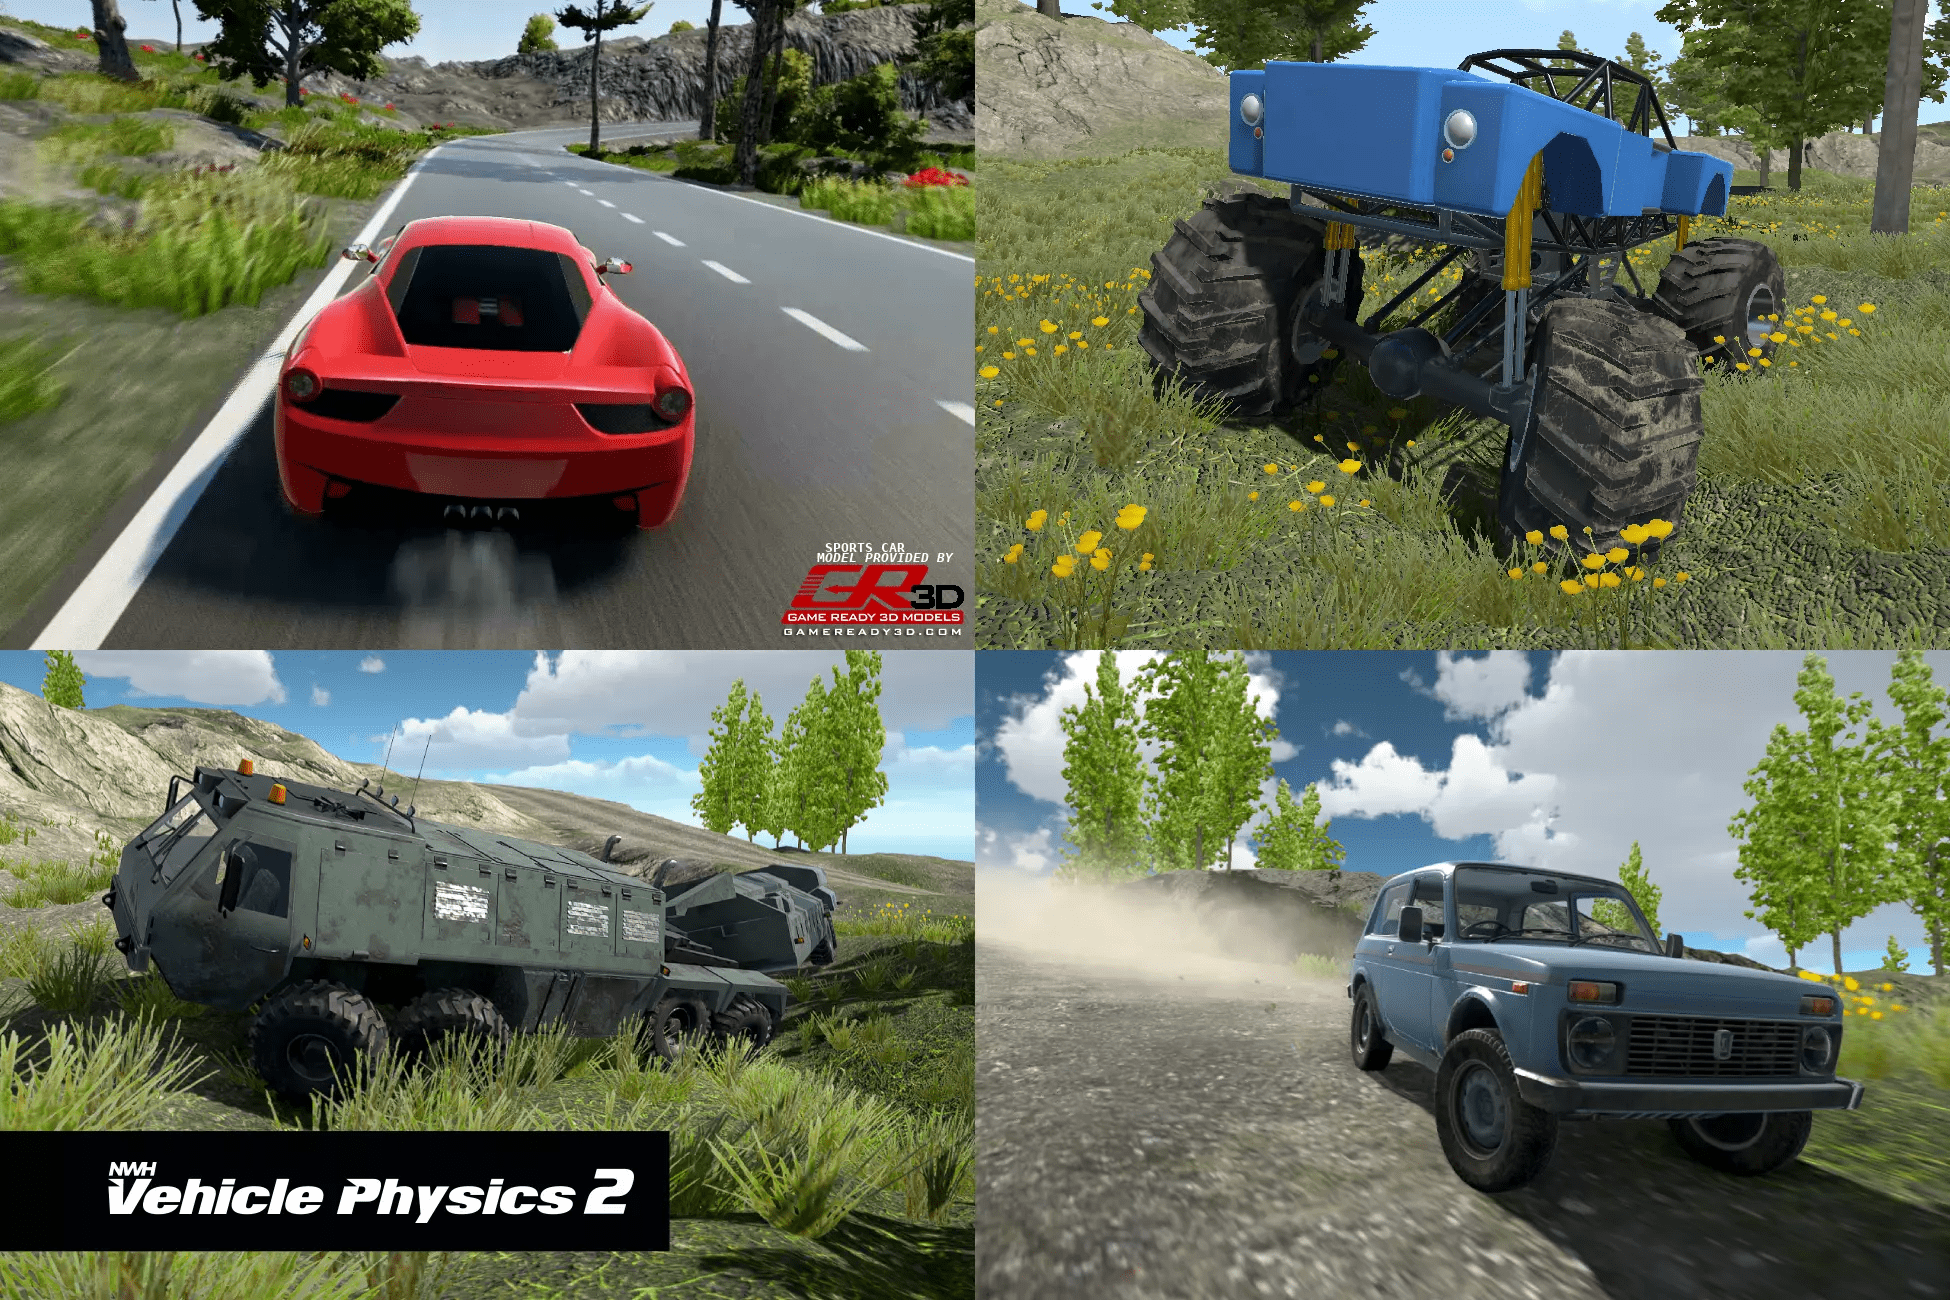 NWH Vehicle Physics 2 - Free Download.